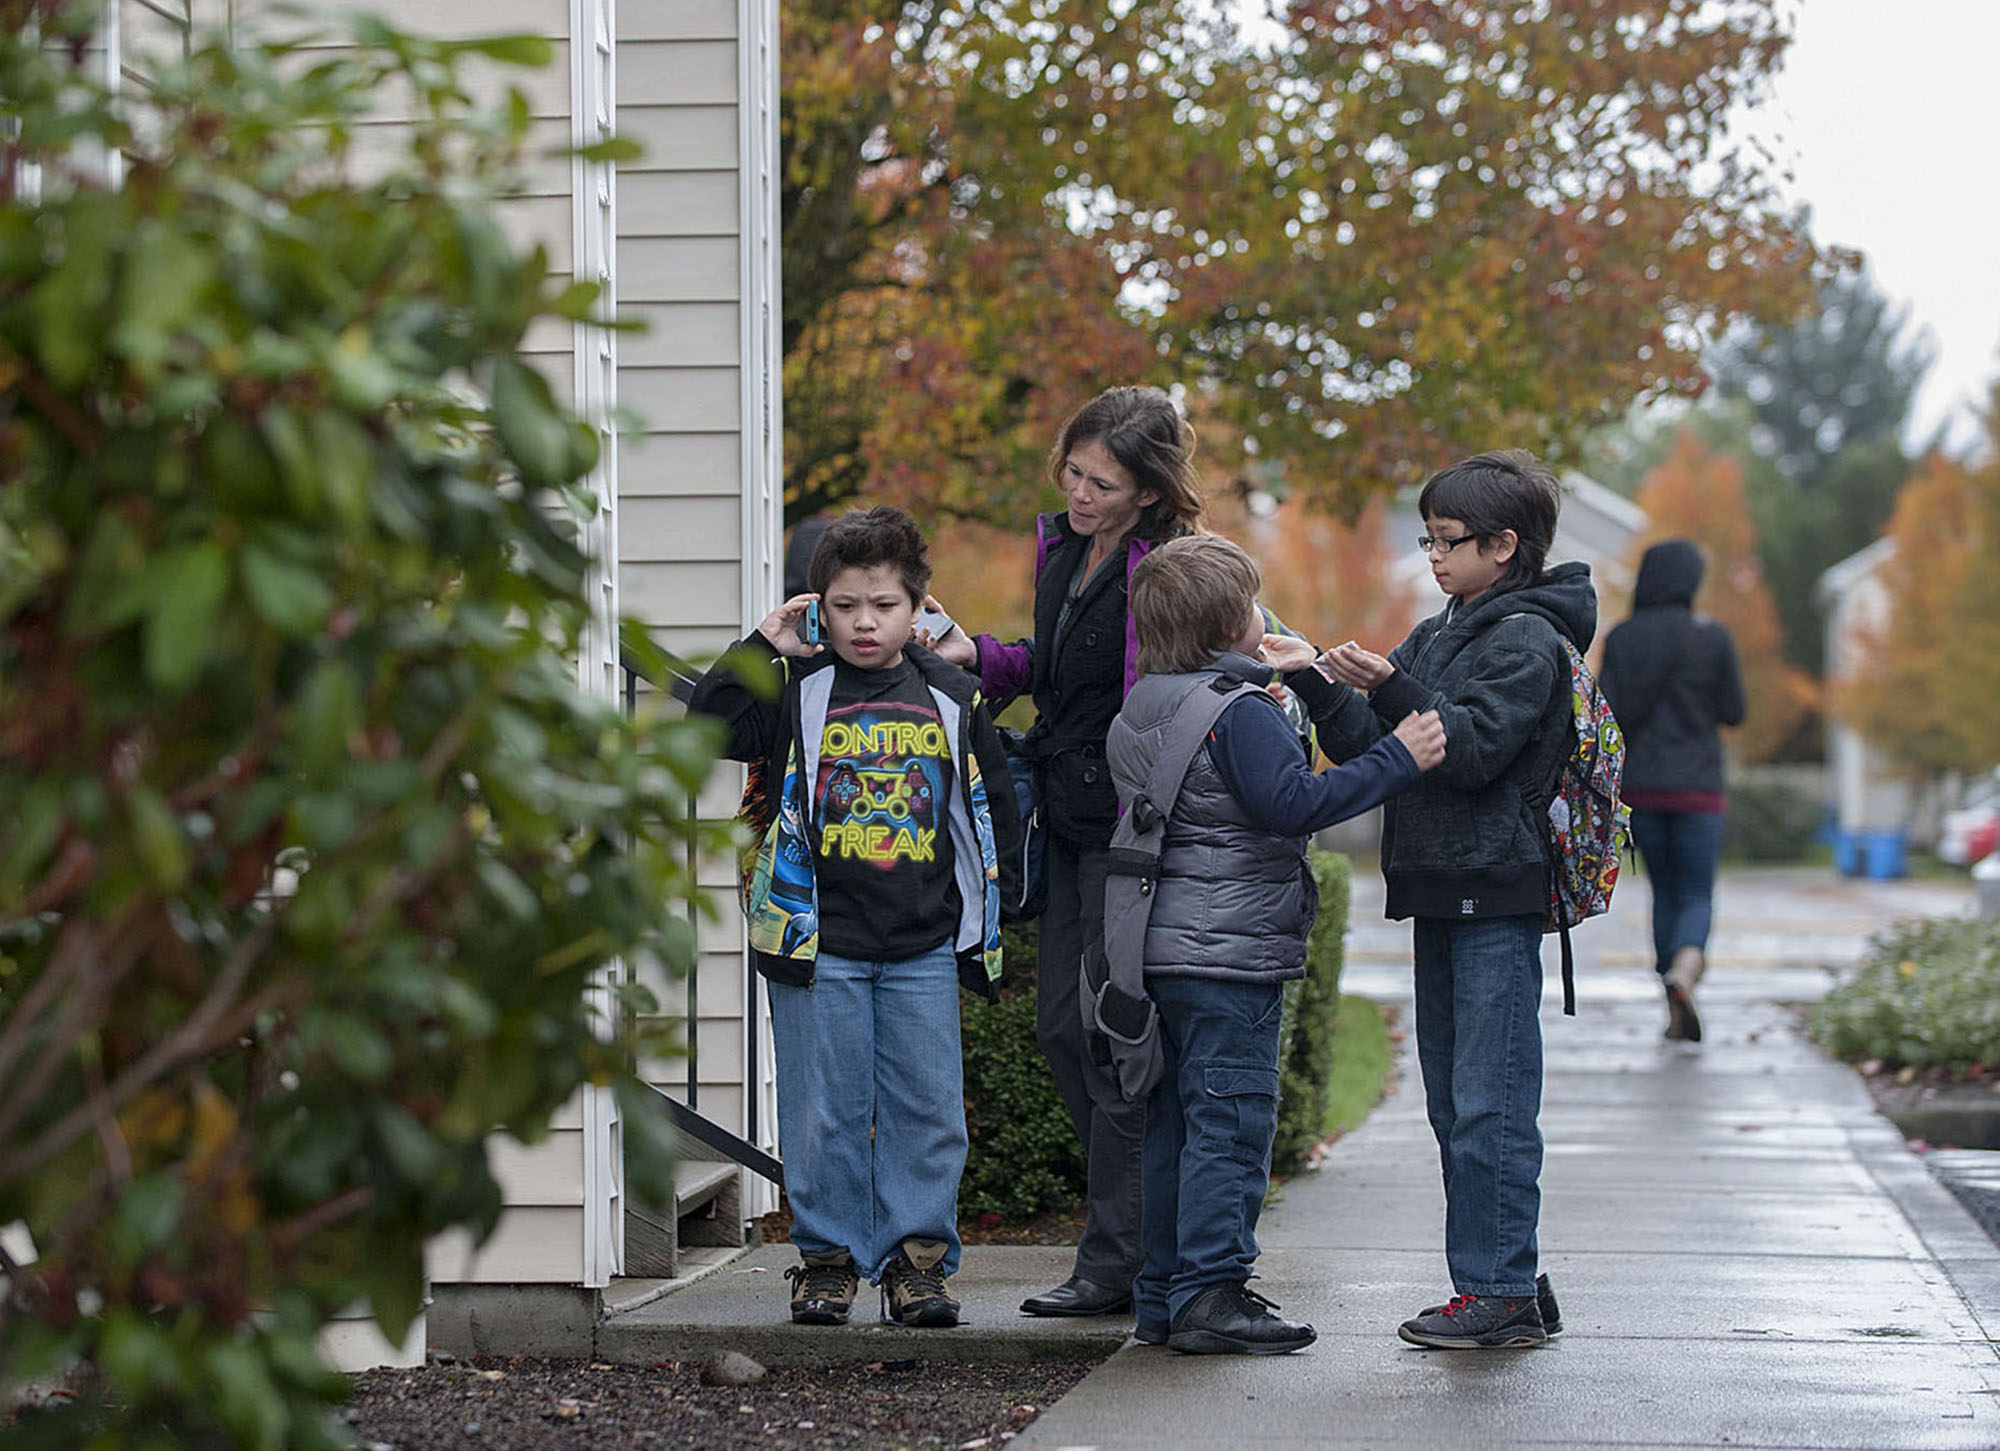 Tensions rise between Ozzy Pinaula, 9, from left, and his mom, Donna, before school as his brothers Johnny Pinaula, 7, and Robert Pinaula, 10, look on Tuesday morning, Nov. 17, 2015 in Orchards. (Amanda Cowan/The Columbian)